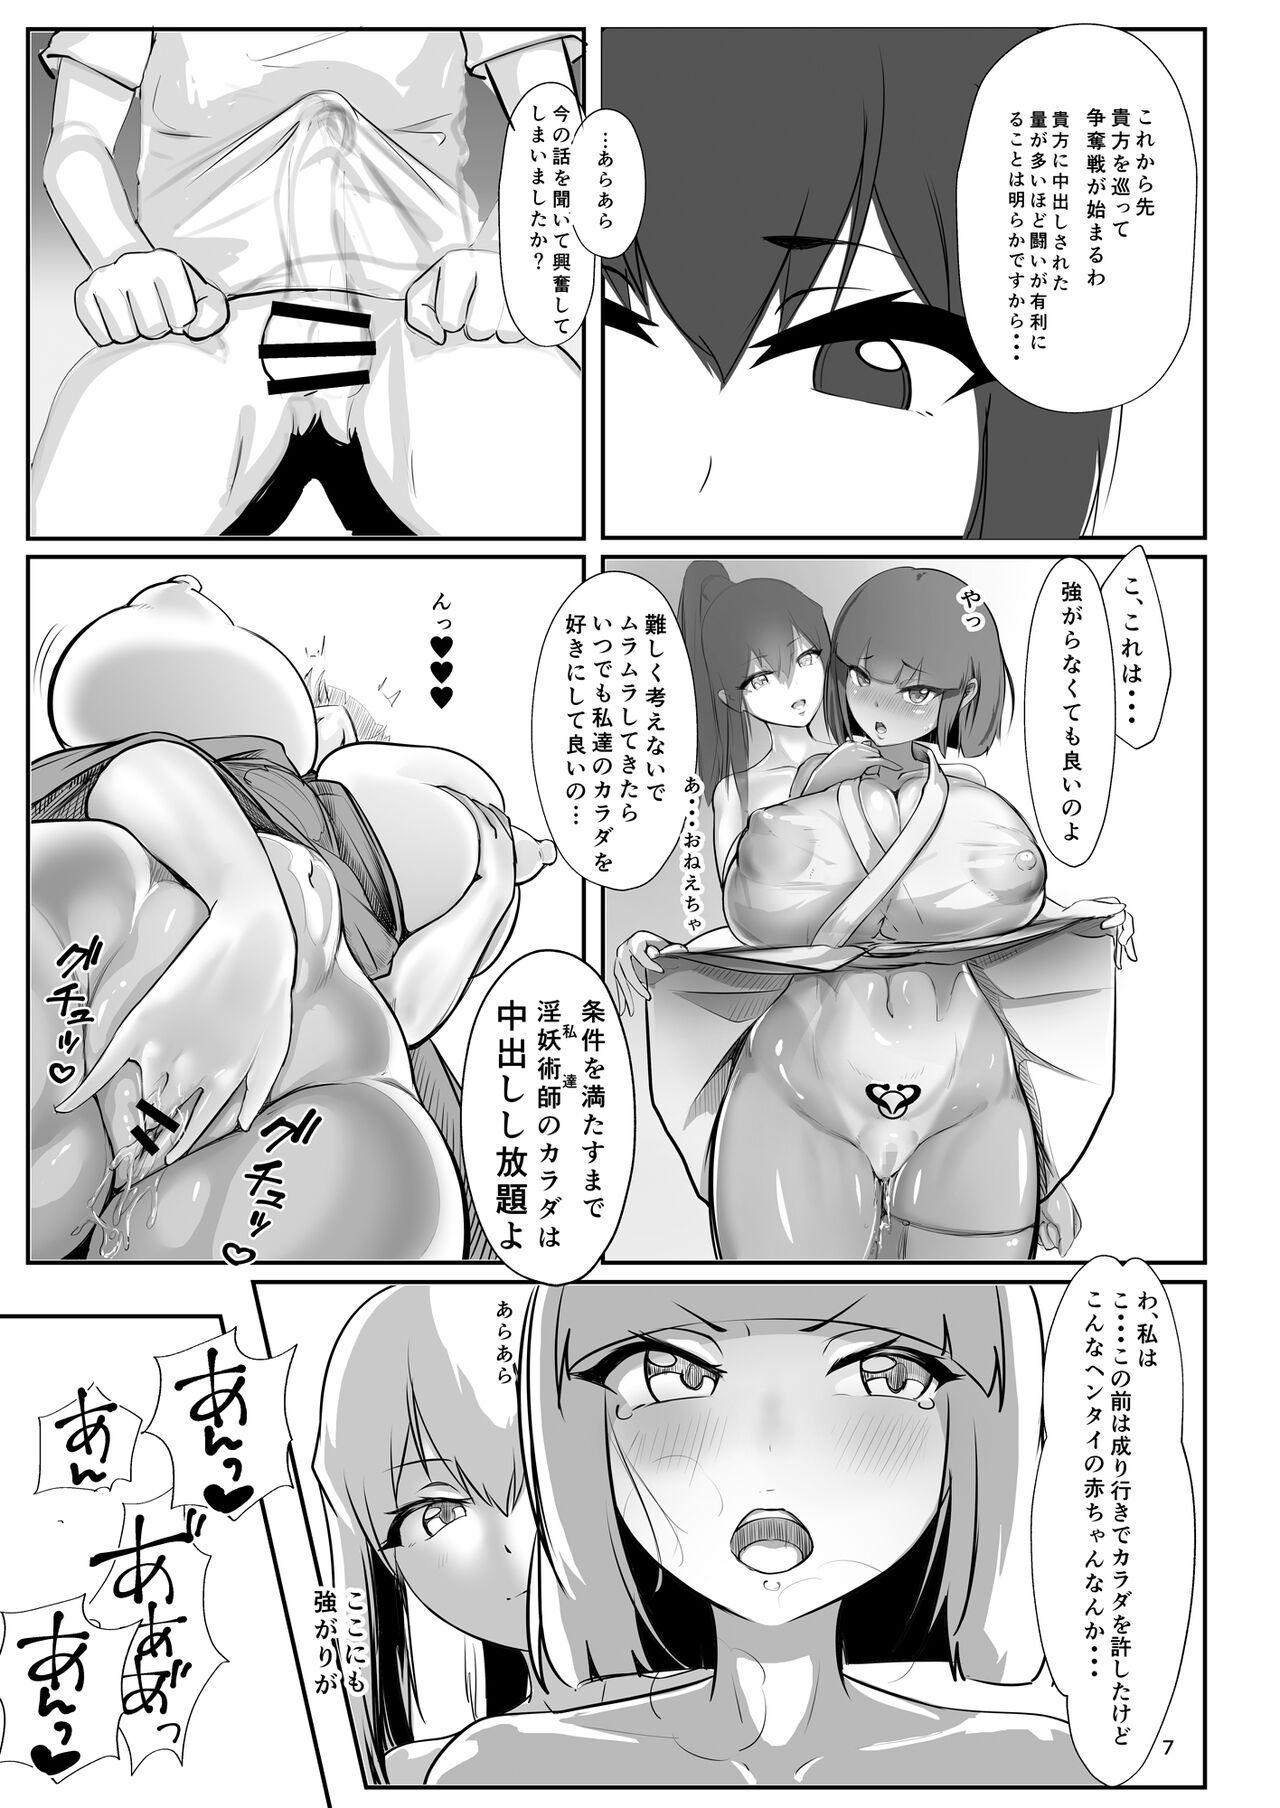 Workout 淫妖奇術競 弐 デカ乳変身ヒロイン中出しハーレム Nasty Porn - Page 6